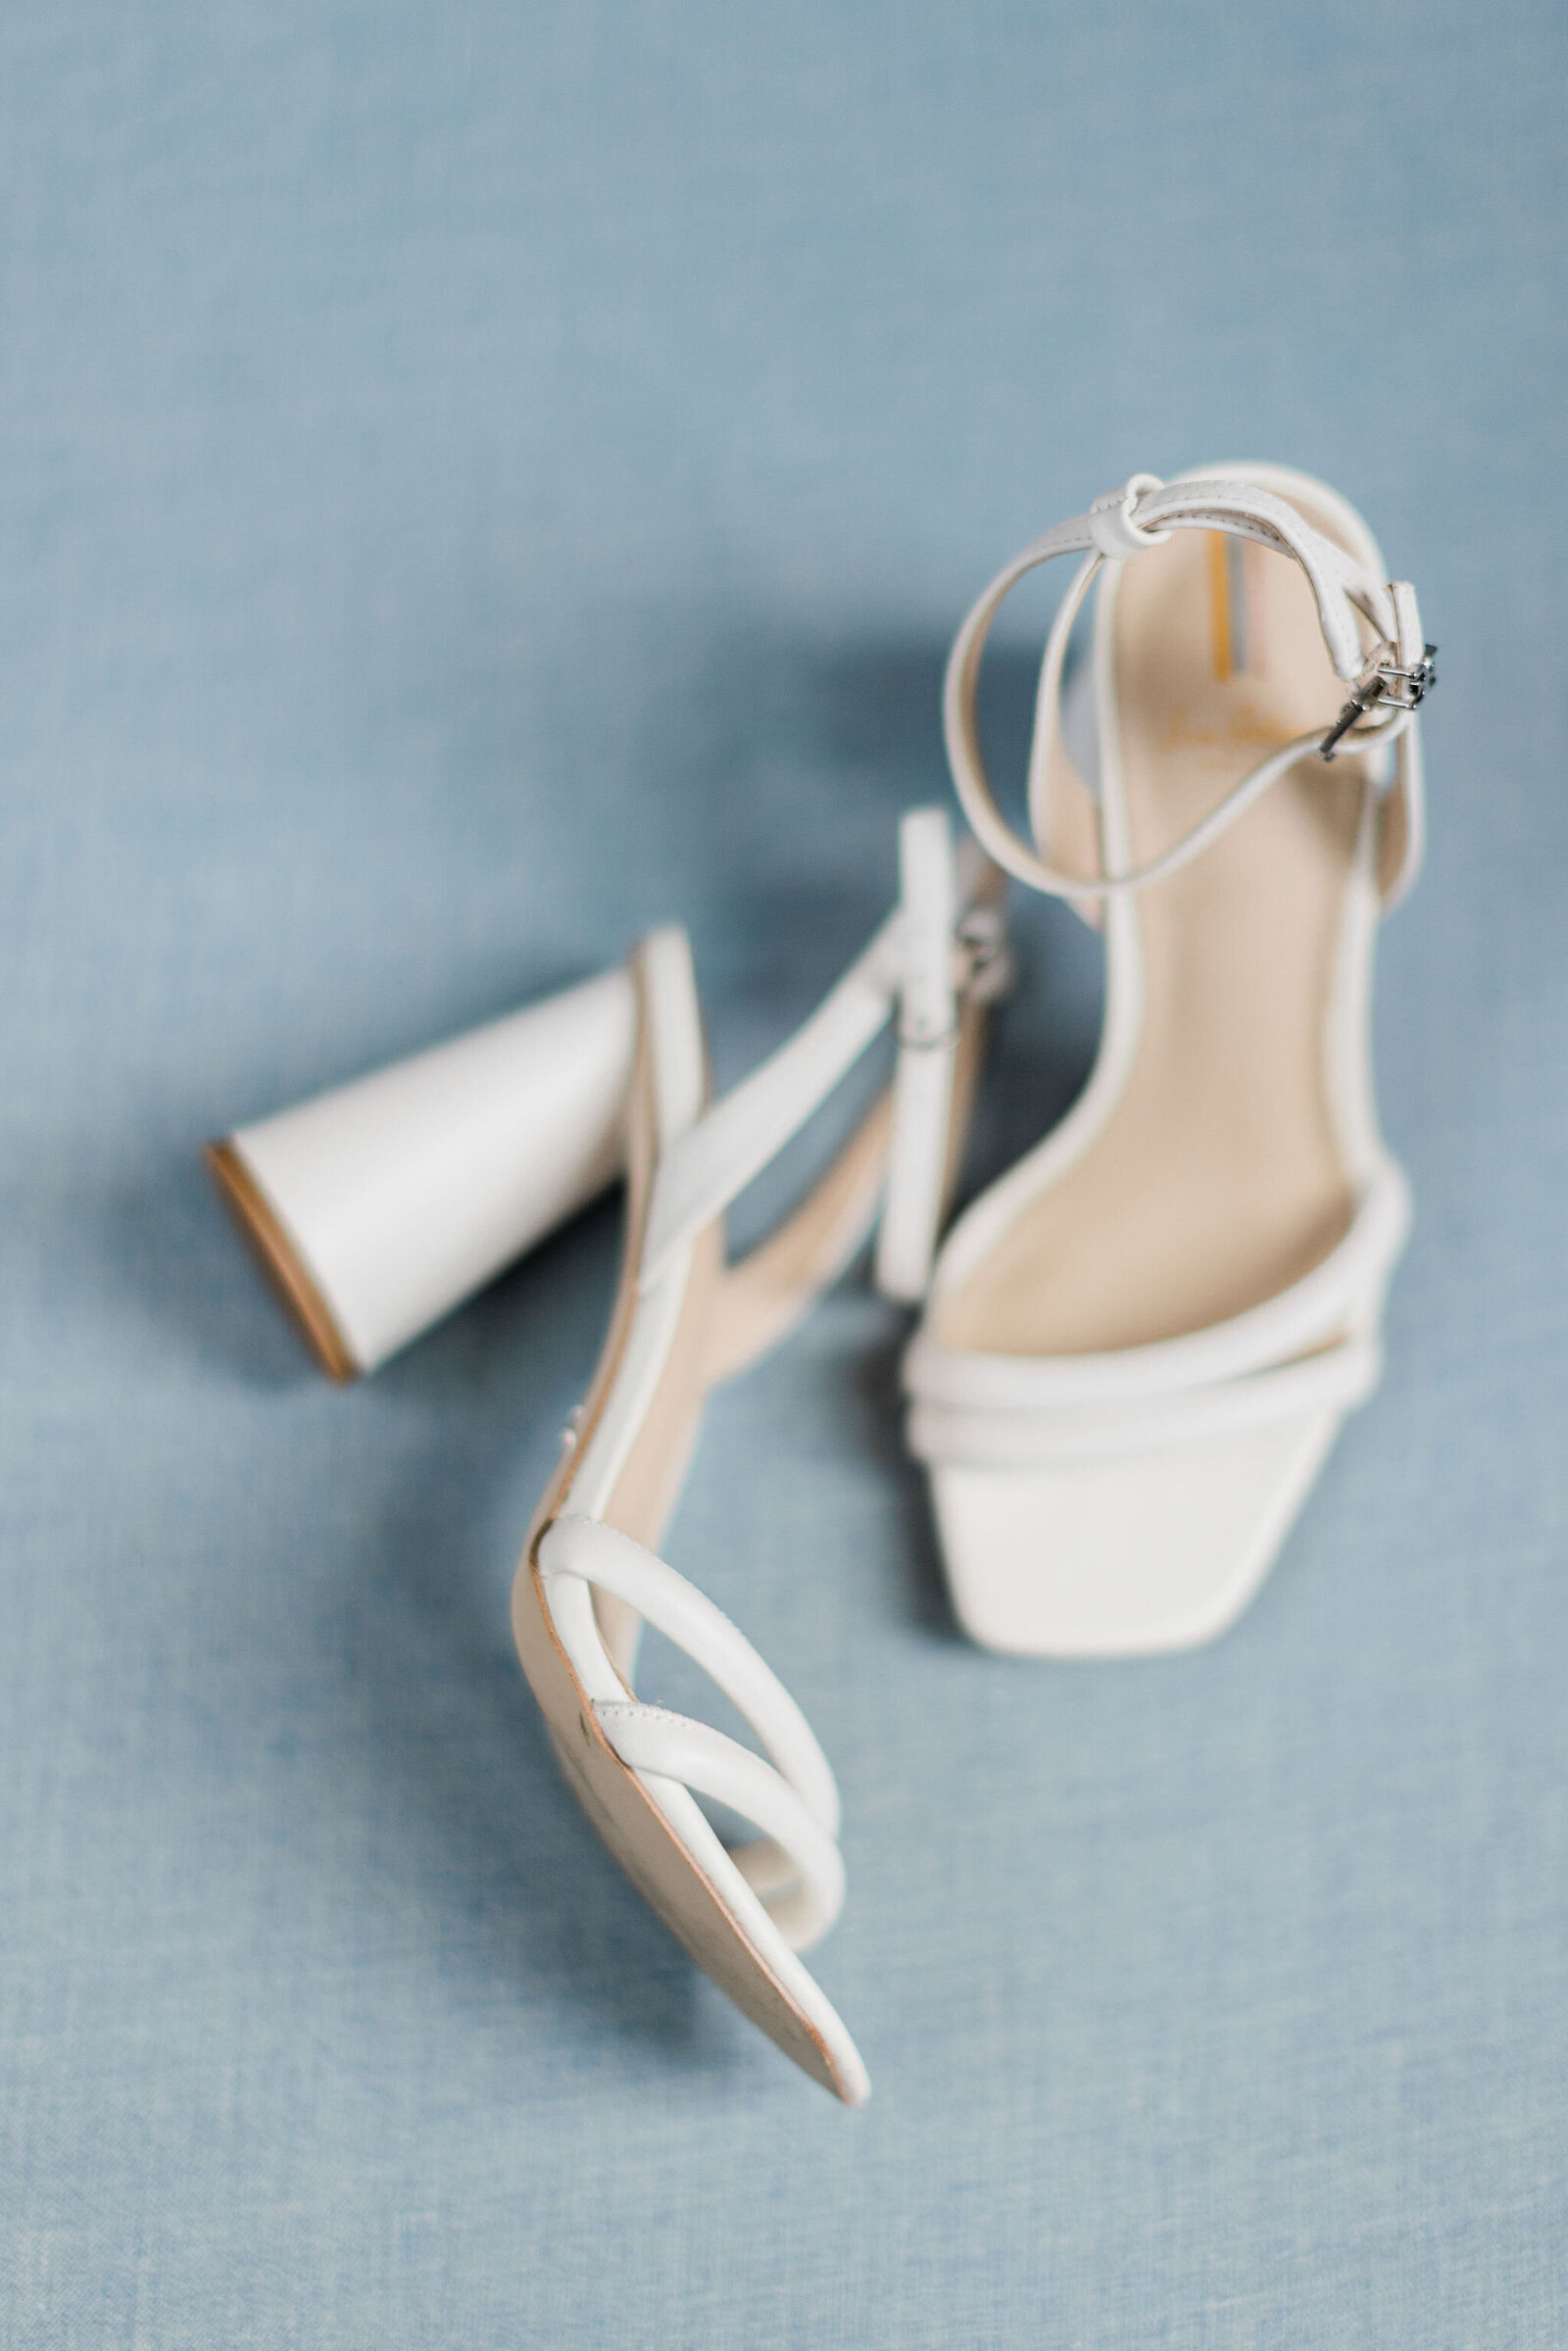 Wedding Day Shoes